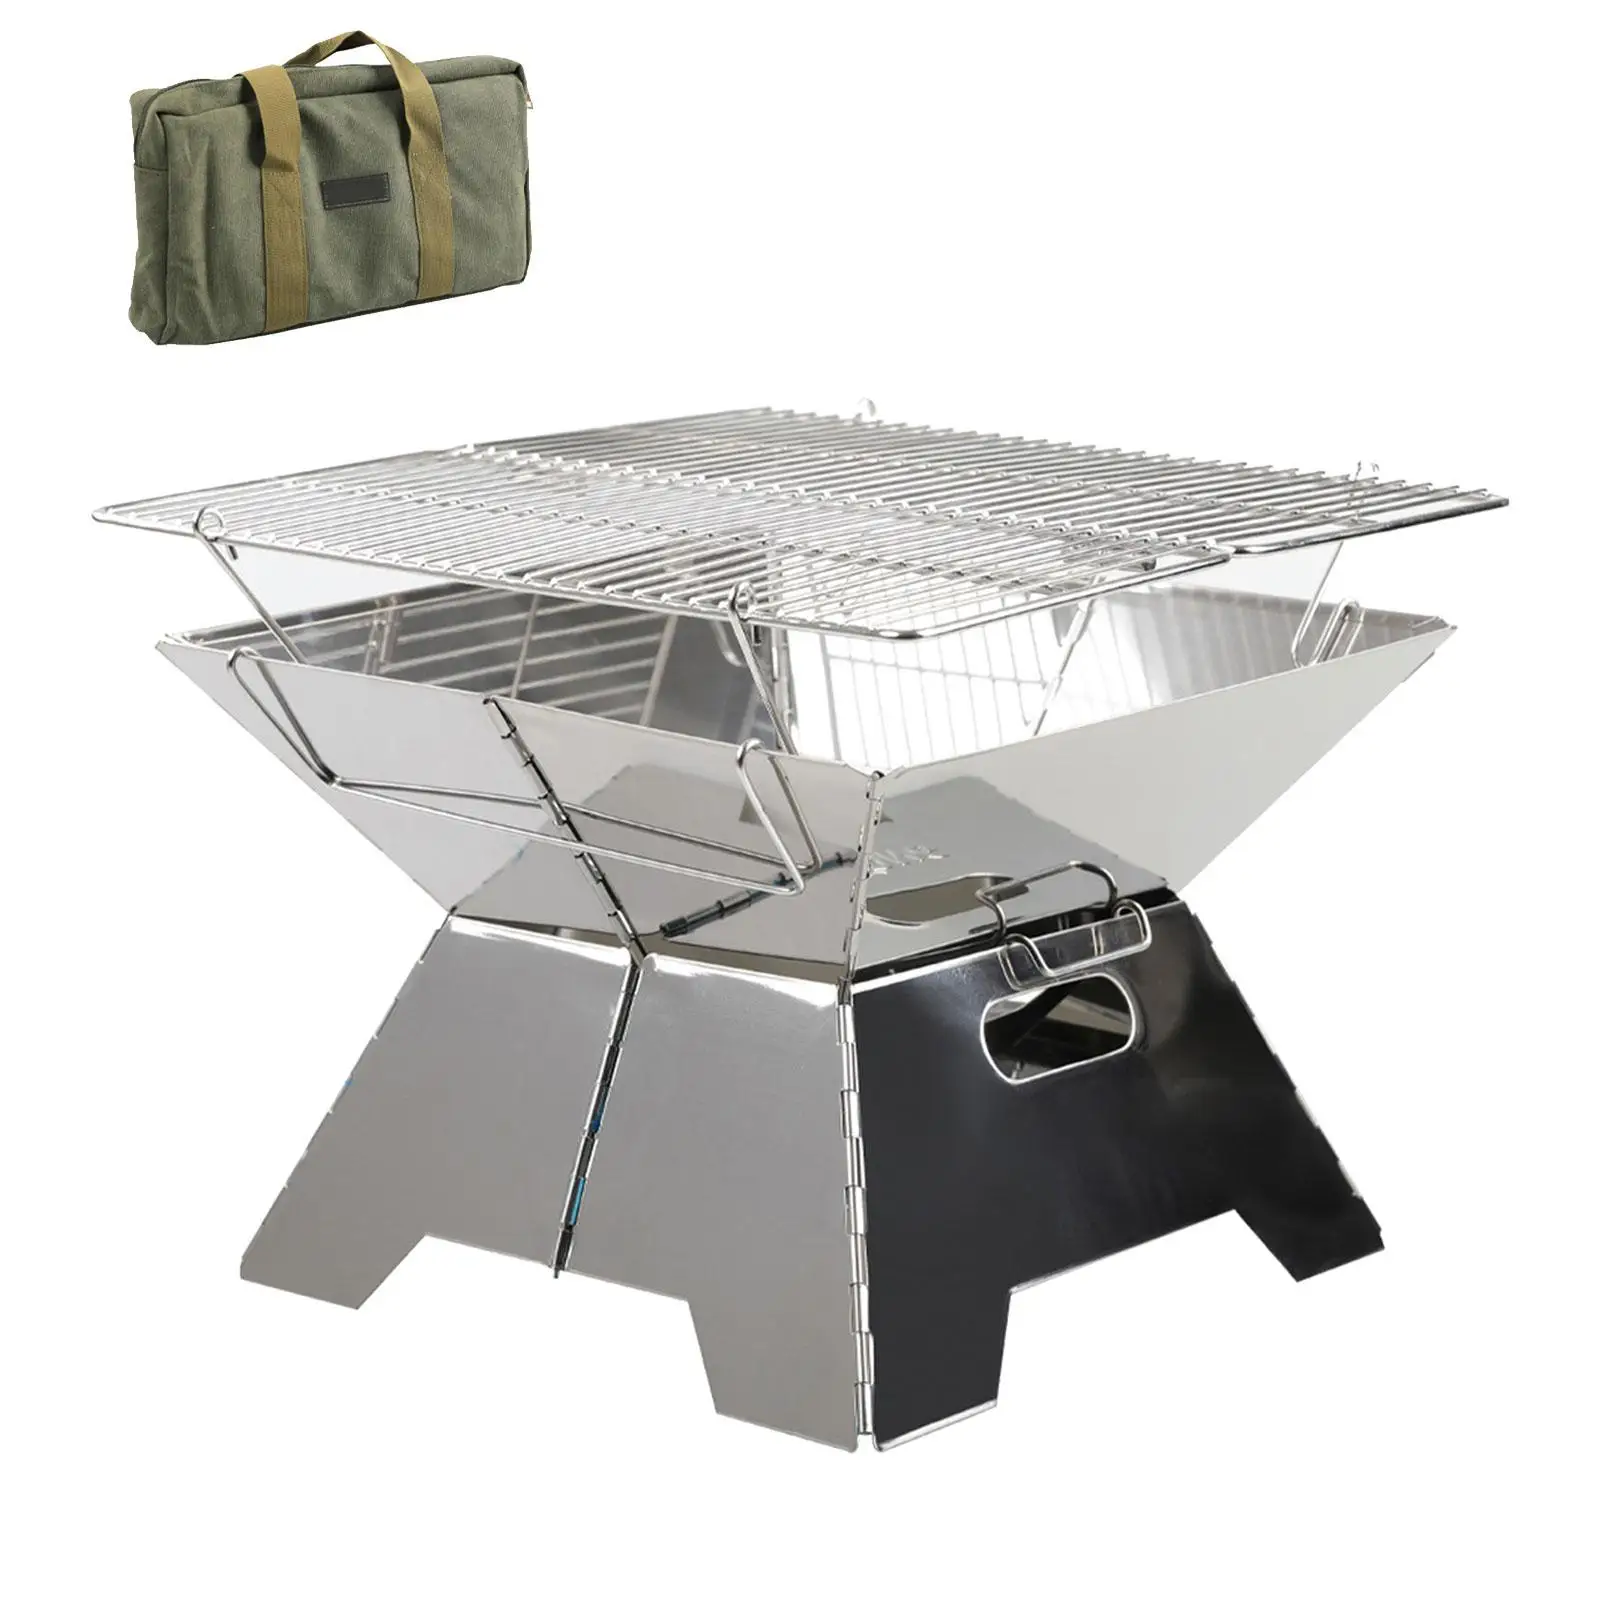 Barbecue Grill Stove Campfire Rack Stainless Steel Campfire Stand Compact Garden Stove for Picnic Traveling Outdoor Camping